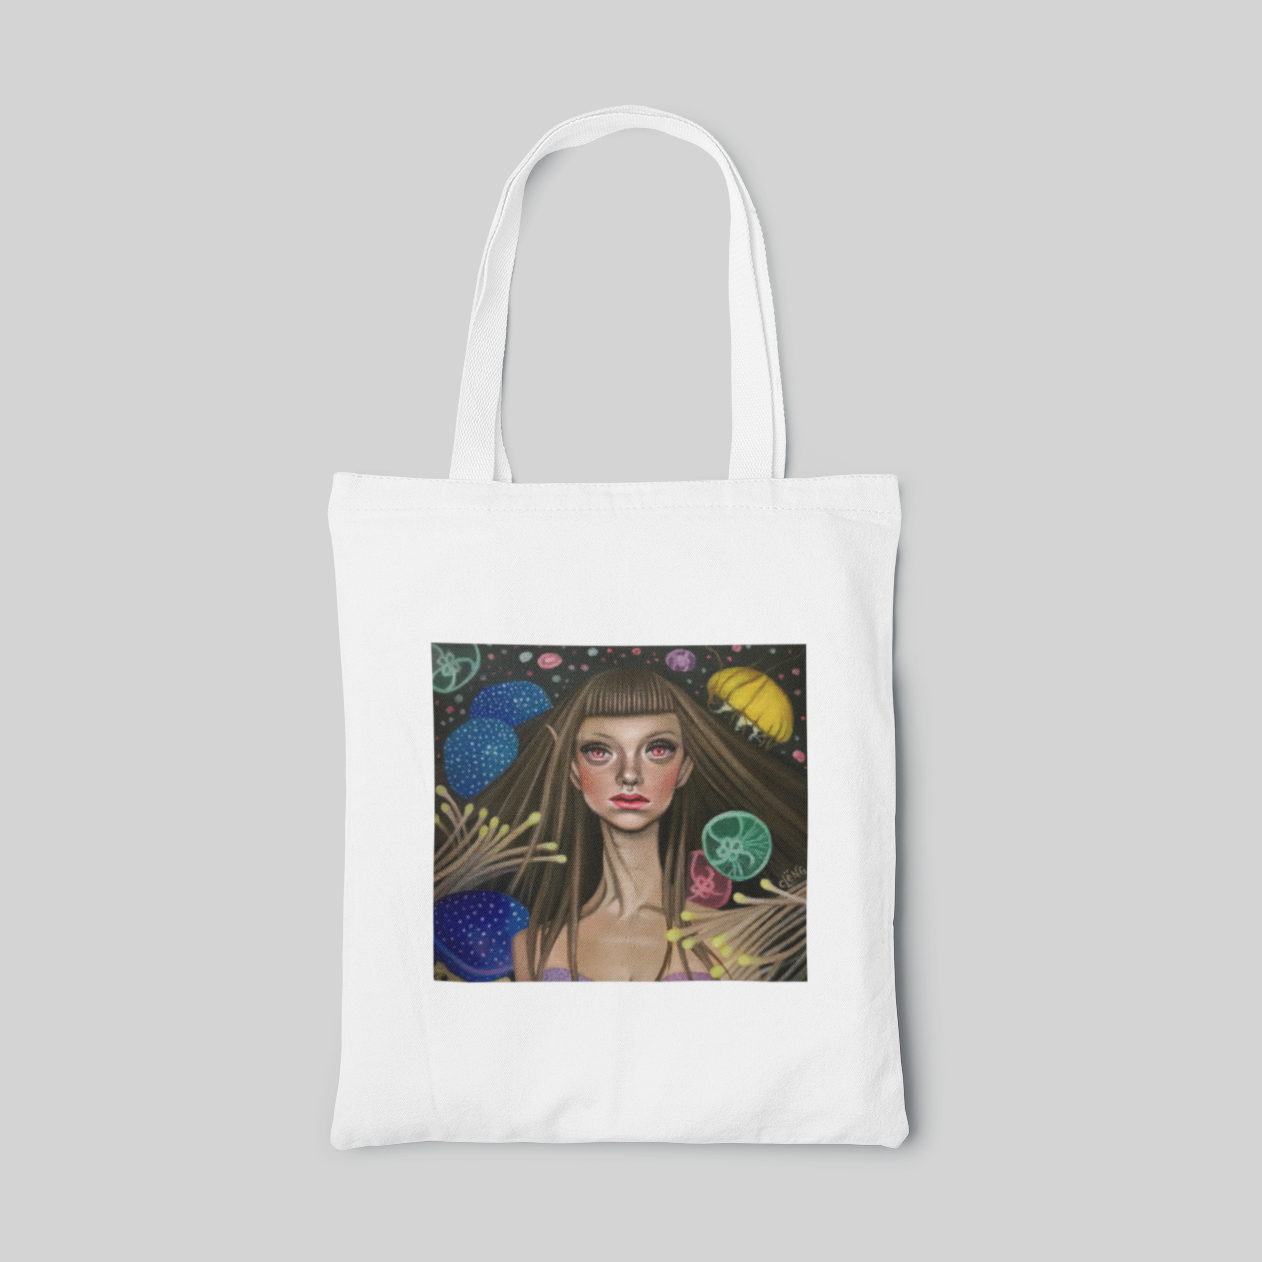 white lowbrow designed tote bag with a girl surrounded by many colourful jellyfishes in a dark background, front side